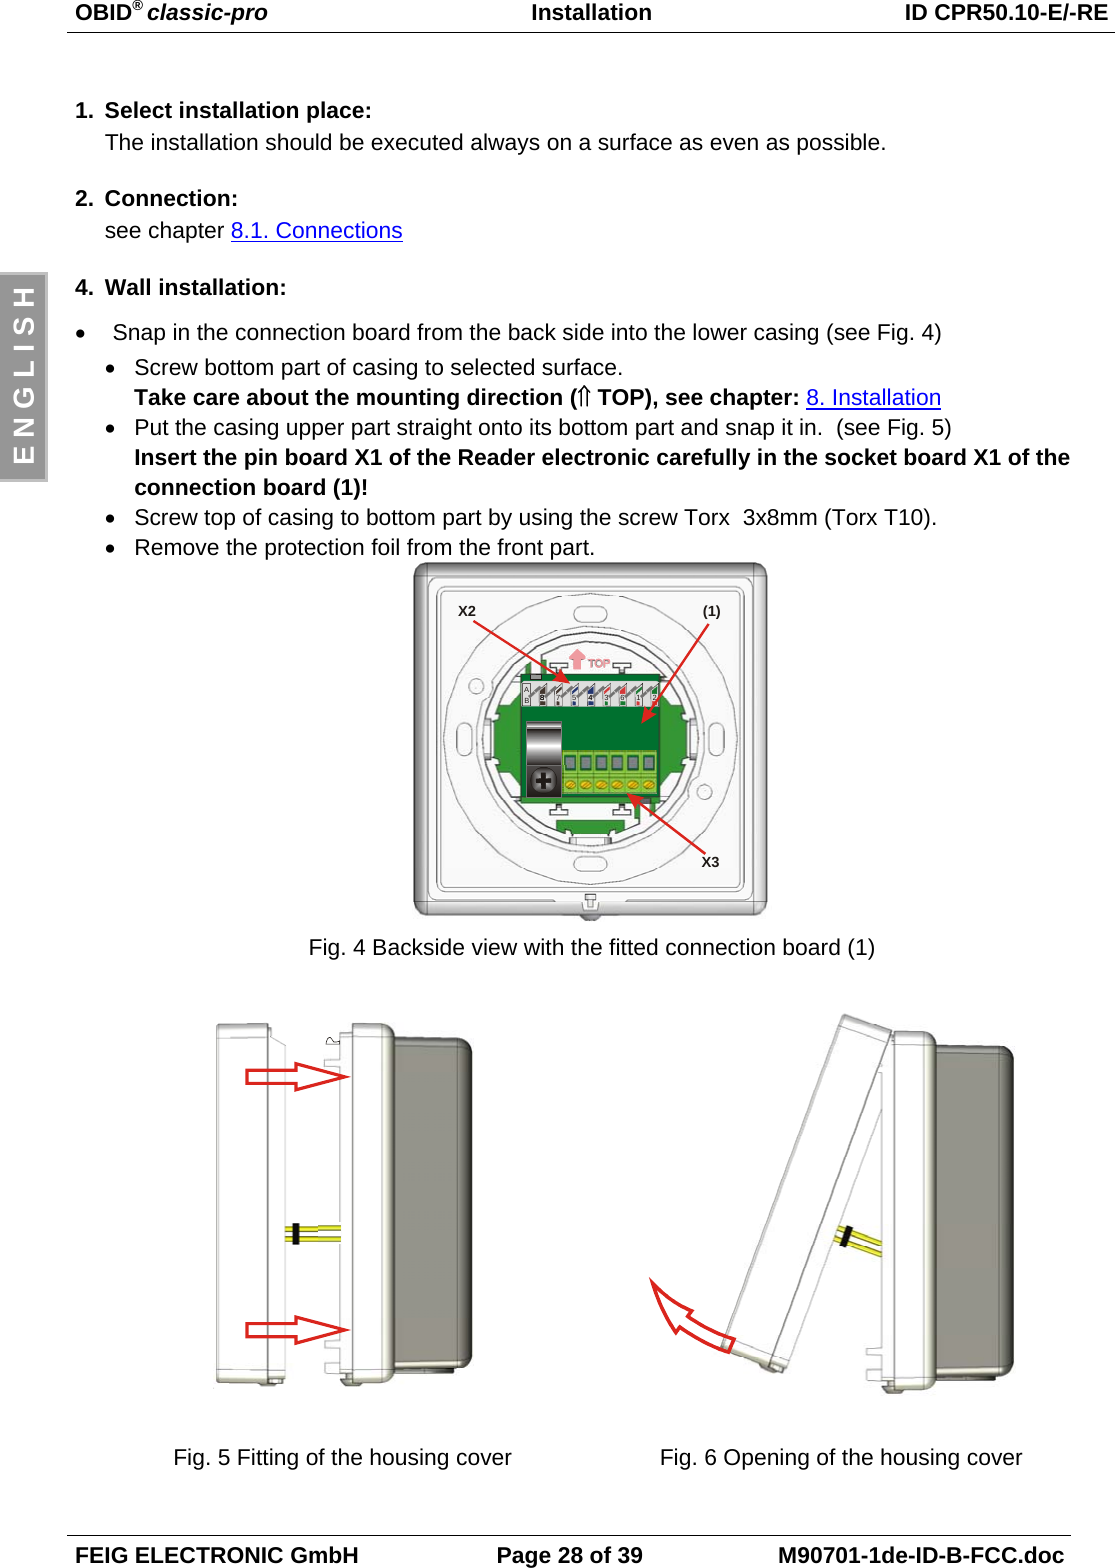 OBID® classic-pro Installation ID CPR50.10-E/-REFEIG ELECTRONIC GmbH Page 28 of 39 M90701-1de-ID-B-FCC.docE N G L I S H1. Select installation place:The installation should be executed always on a surface as even as possible.2. Connection:see chapter 8.1. Connections4. Wall installation:• Snap in the connection board from the back side into the lower casing (see Fig. 4)• Screw bottom part of casing to selected surface.Take care about the mounting direction (⇑ TOP), see chapter: 8. Installation• Put the casing upper part straight onto its bottom part and snap it in.  (see Fig. 5)Insert the pin board X1 of the Reader electronic carefully in the socket board X1 of theconnection board (1)! • Screw top of casing to bottom part by using the screw Torx  3x8mm (Torx T10).• Remove the protection foil from the front part.88BA785436412X3X2 (1)Fig. 4 Backside view with the fitted connection board (1)Fig. 5 Fitting of the housing cover Fig. 6 Opening of the housing cover